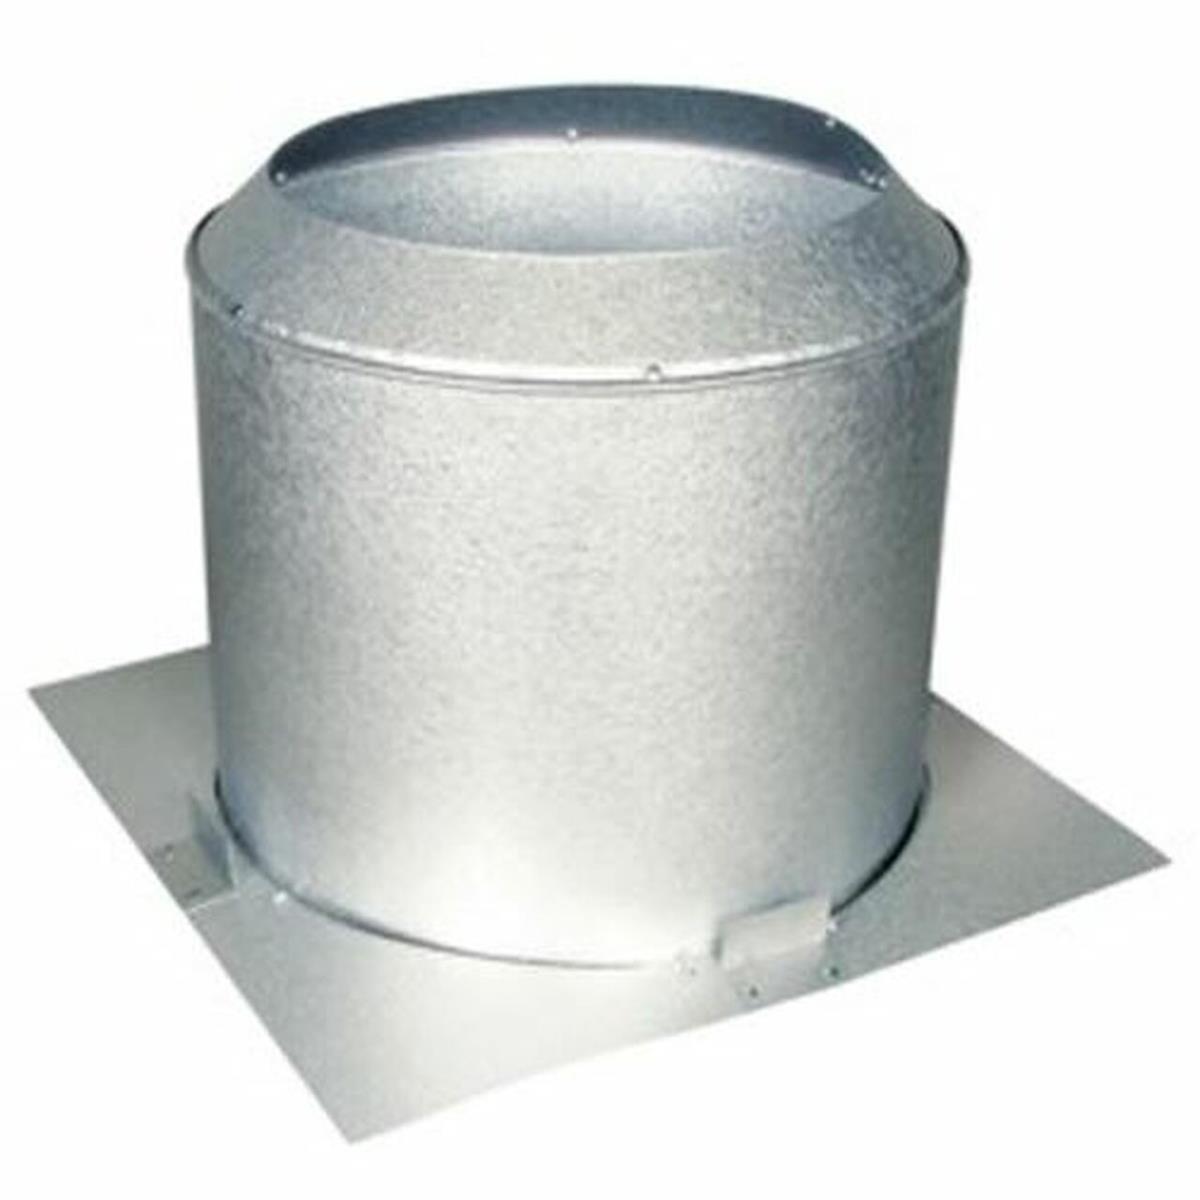 Picture of Majestic AS8 Attic Insulation Straight Flue Shield for Firestop